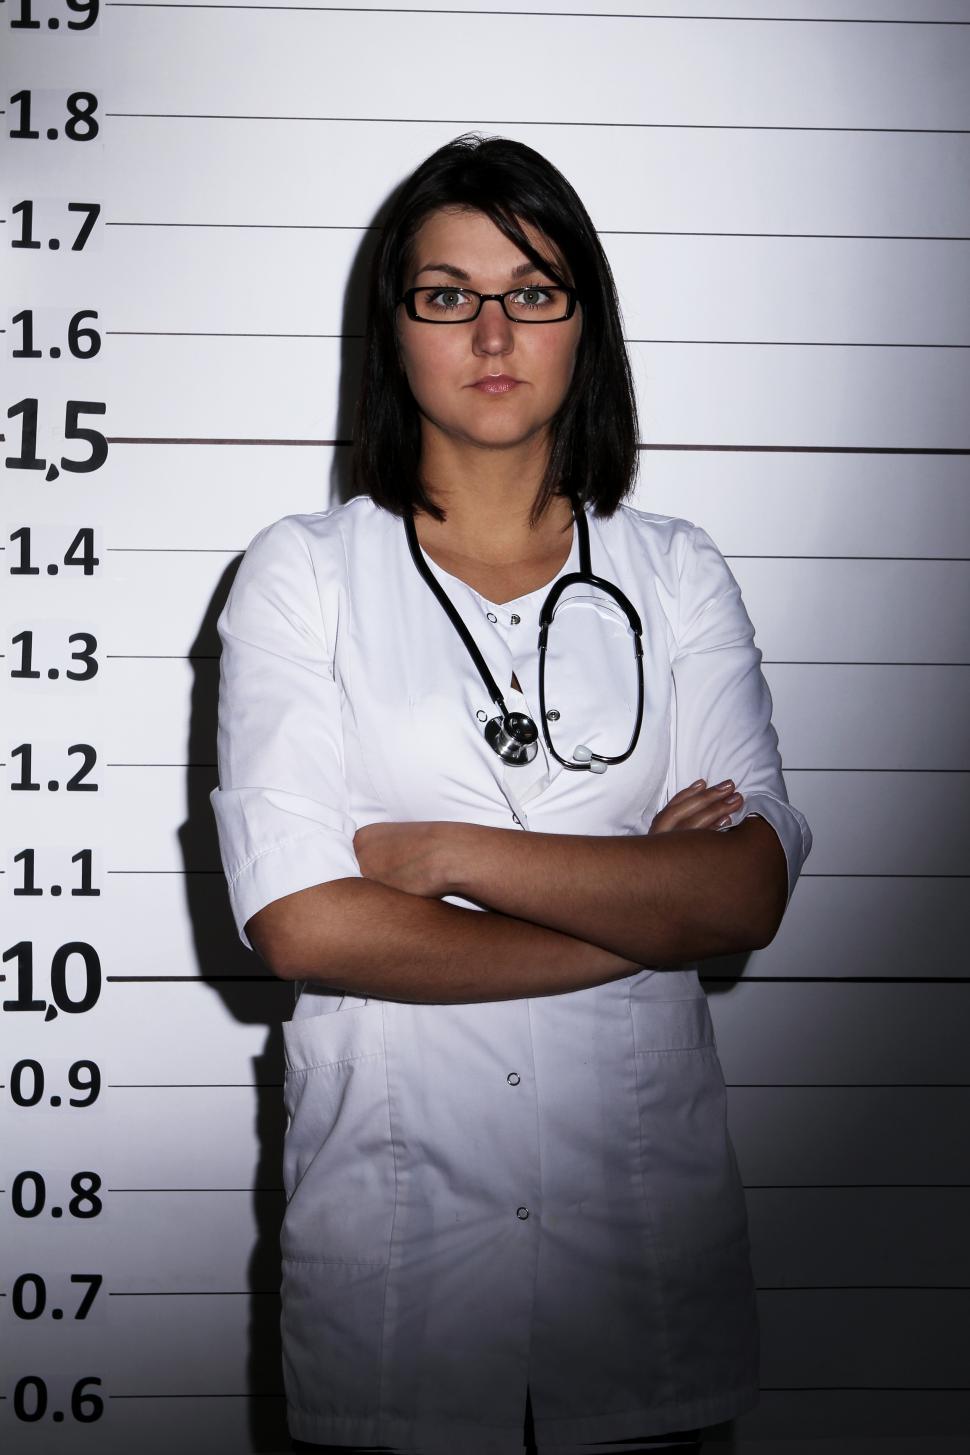 Free Image of Doctor over  jail background 